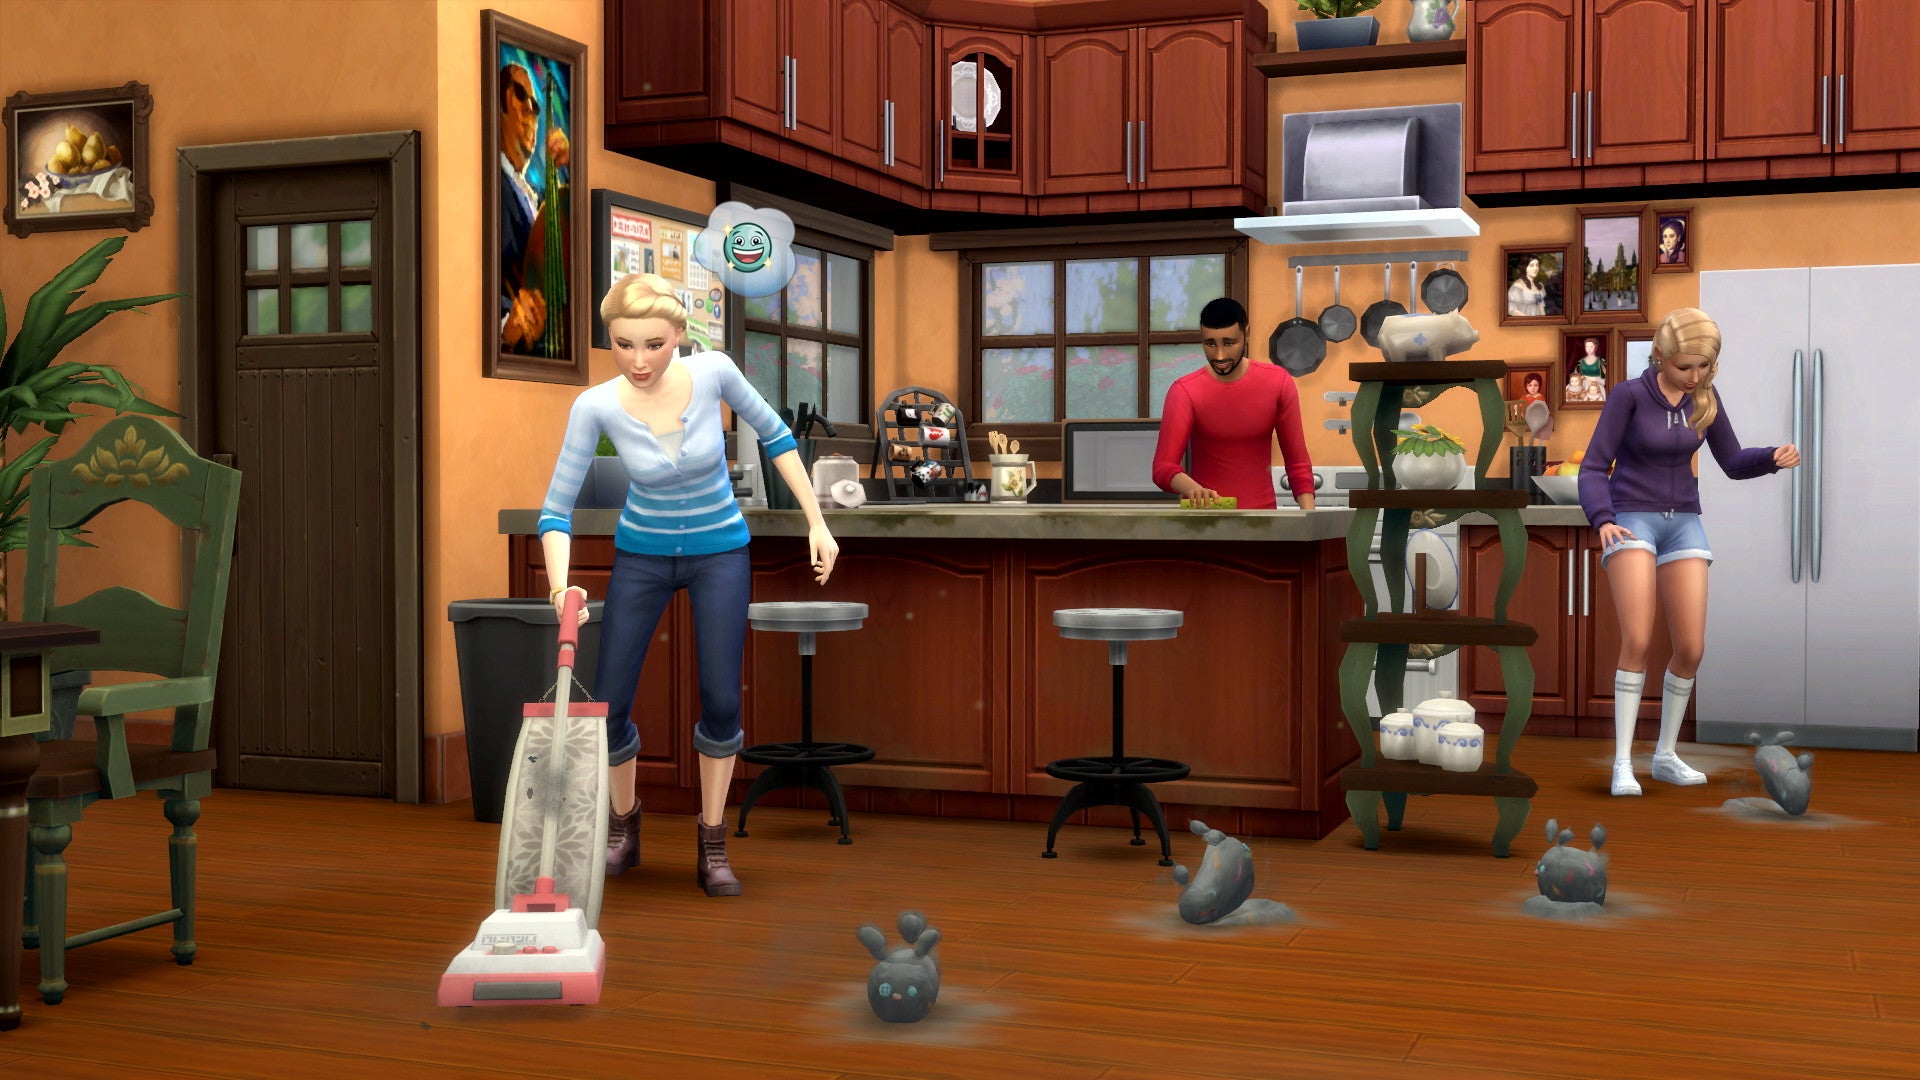 A screenshot of The Sims 4 Bust The Dust kit, showing a woman vacuuming in a kitchen while living dust bunnies hop on the floor.